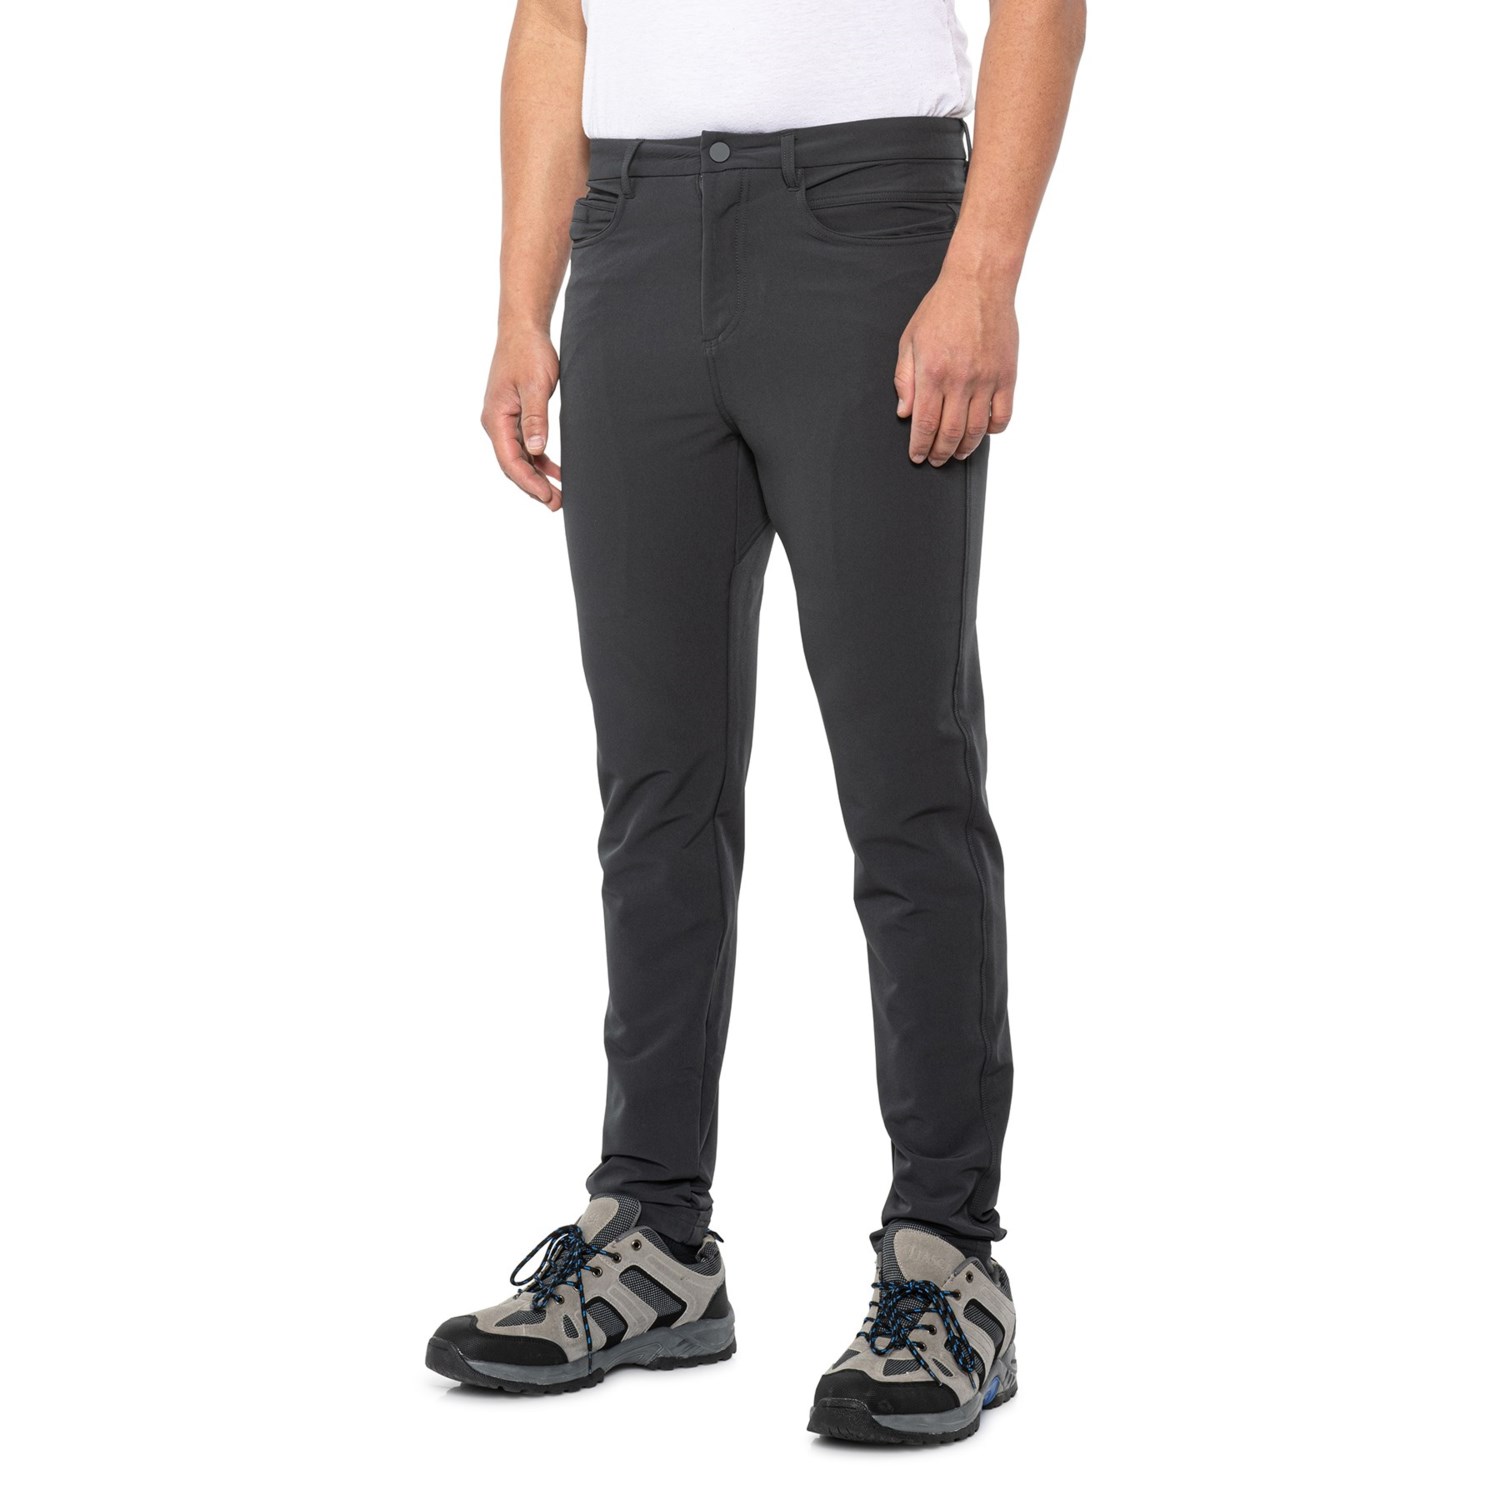 Kyodan Outdoor Stretch-Woven Pants (For Men) - Save 70%